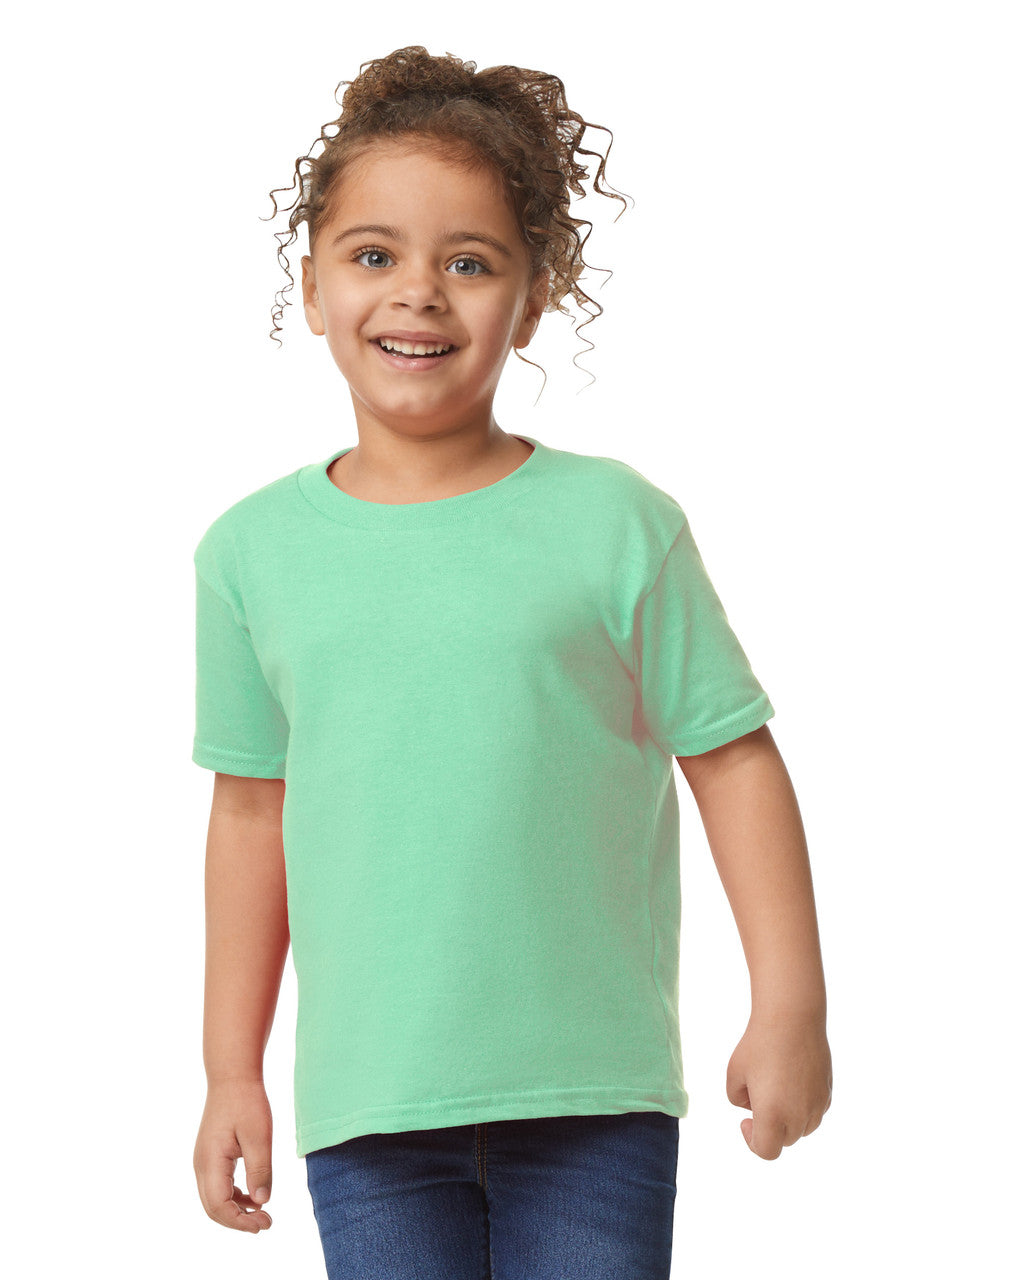 Toddlers Tshirt - Mint Green